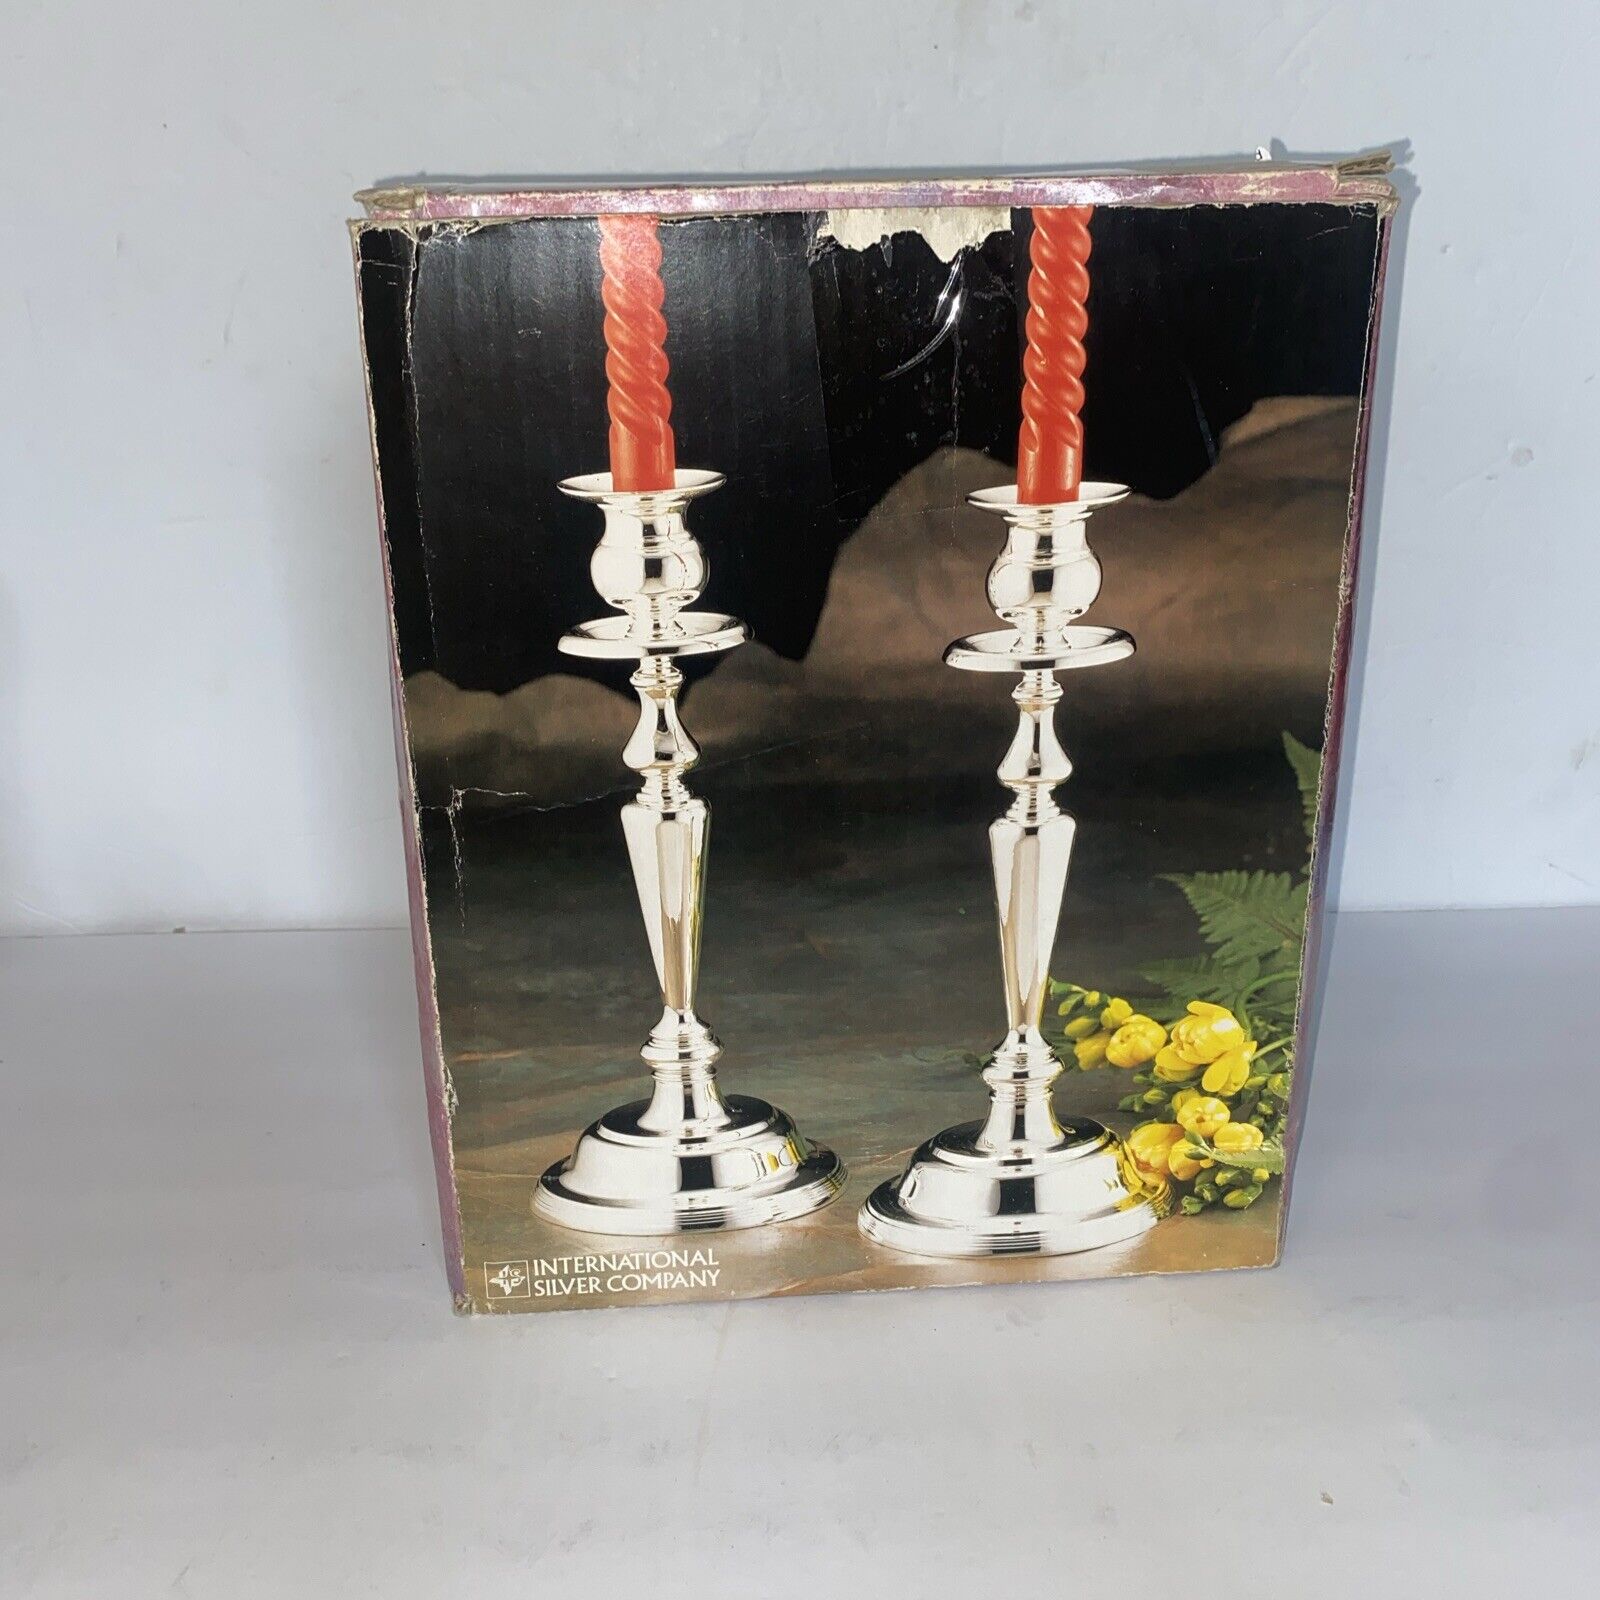 Vtg International Silver Company Silver Plated Candlestick Holder Pair NOS